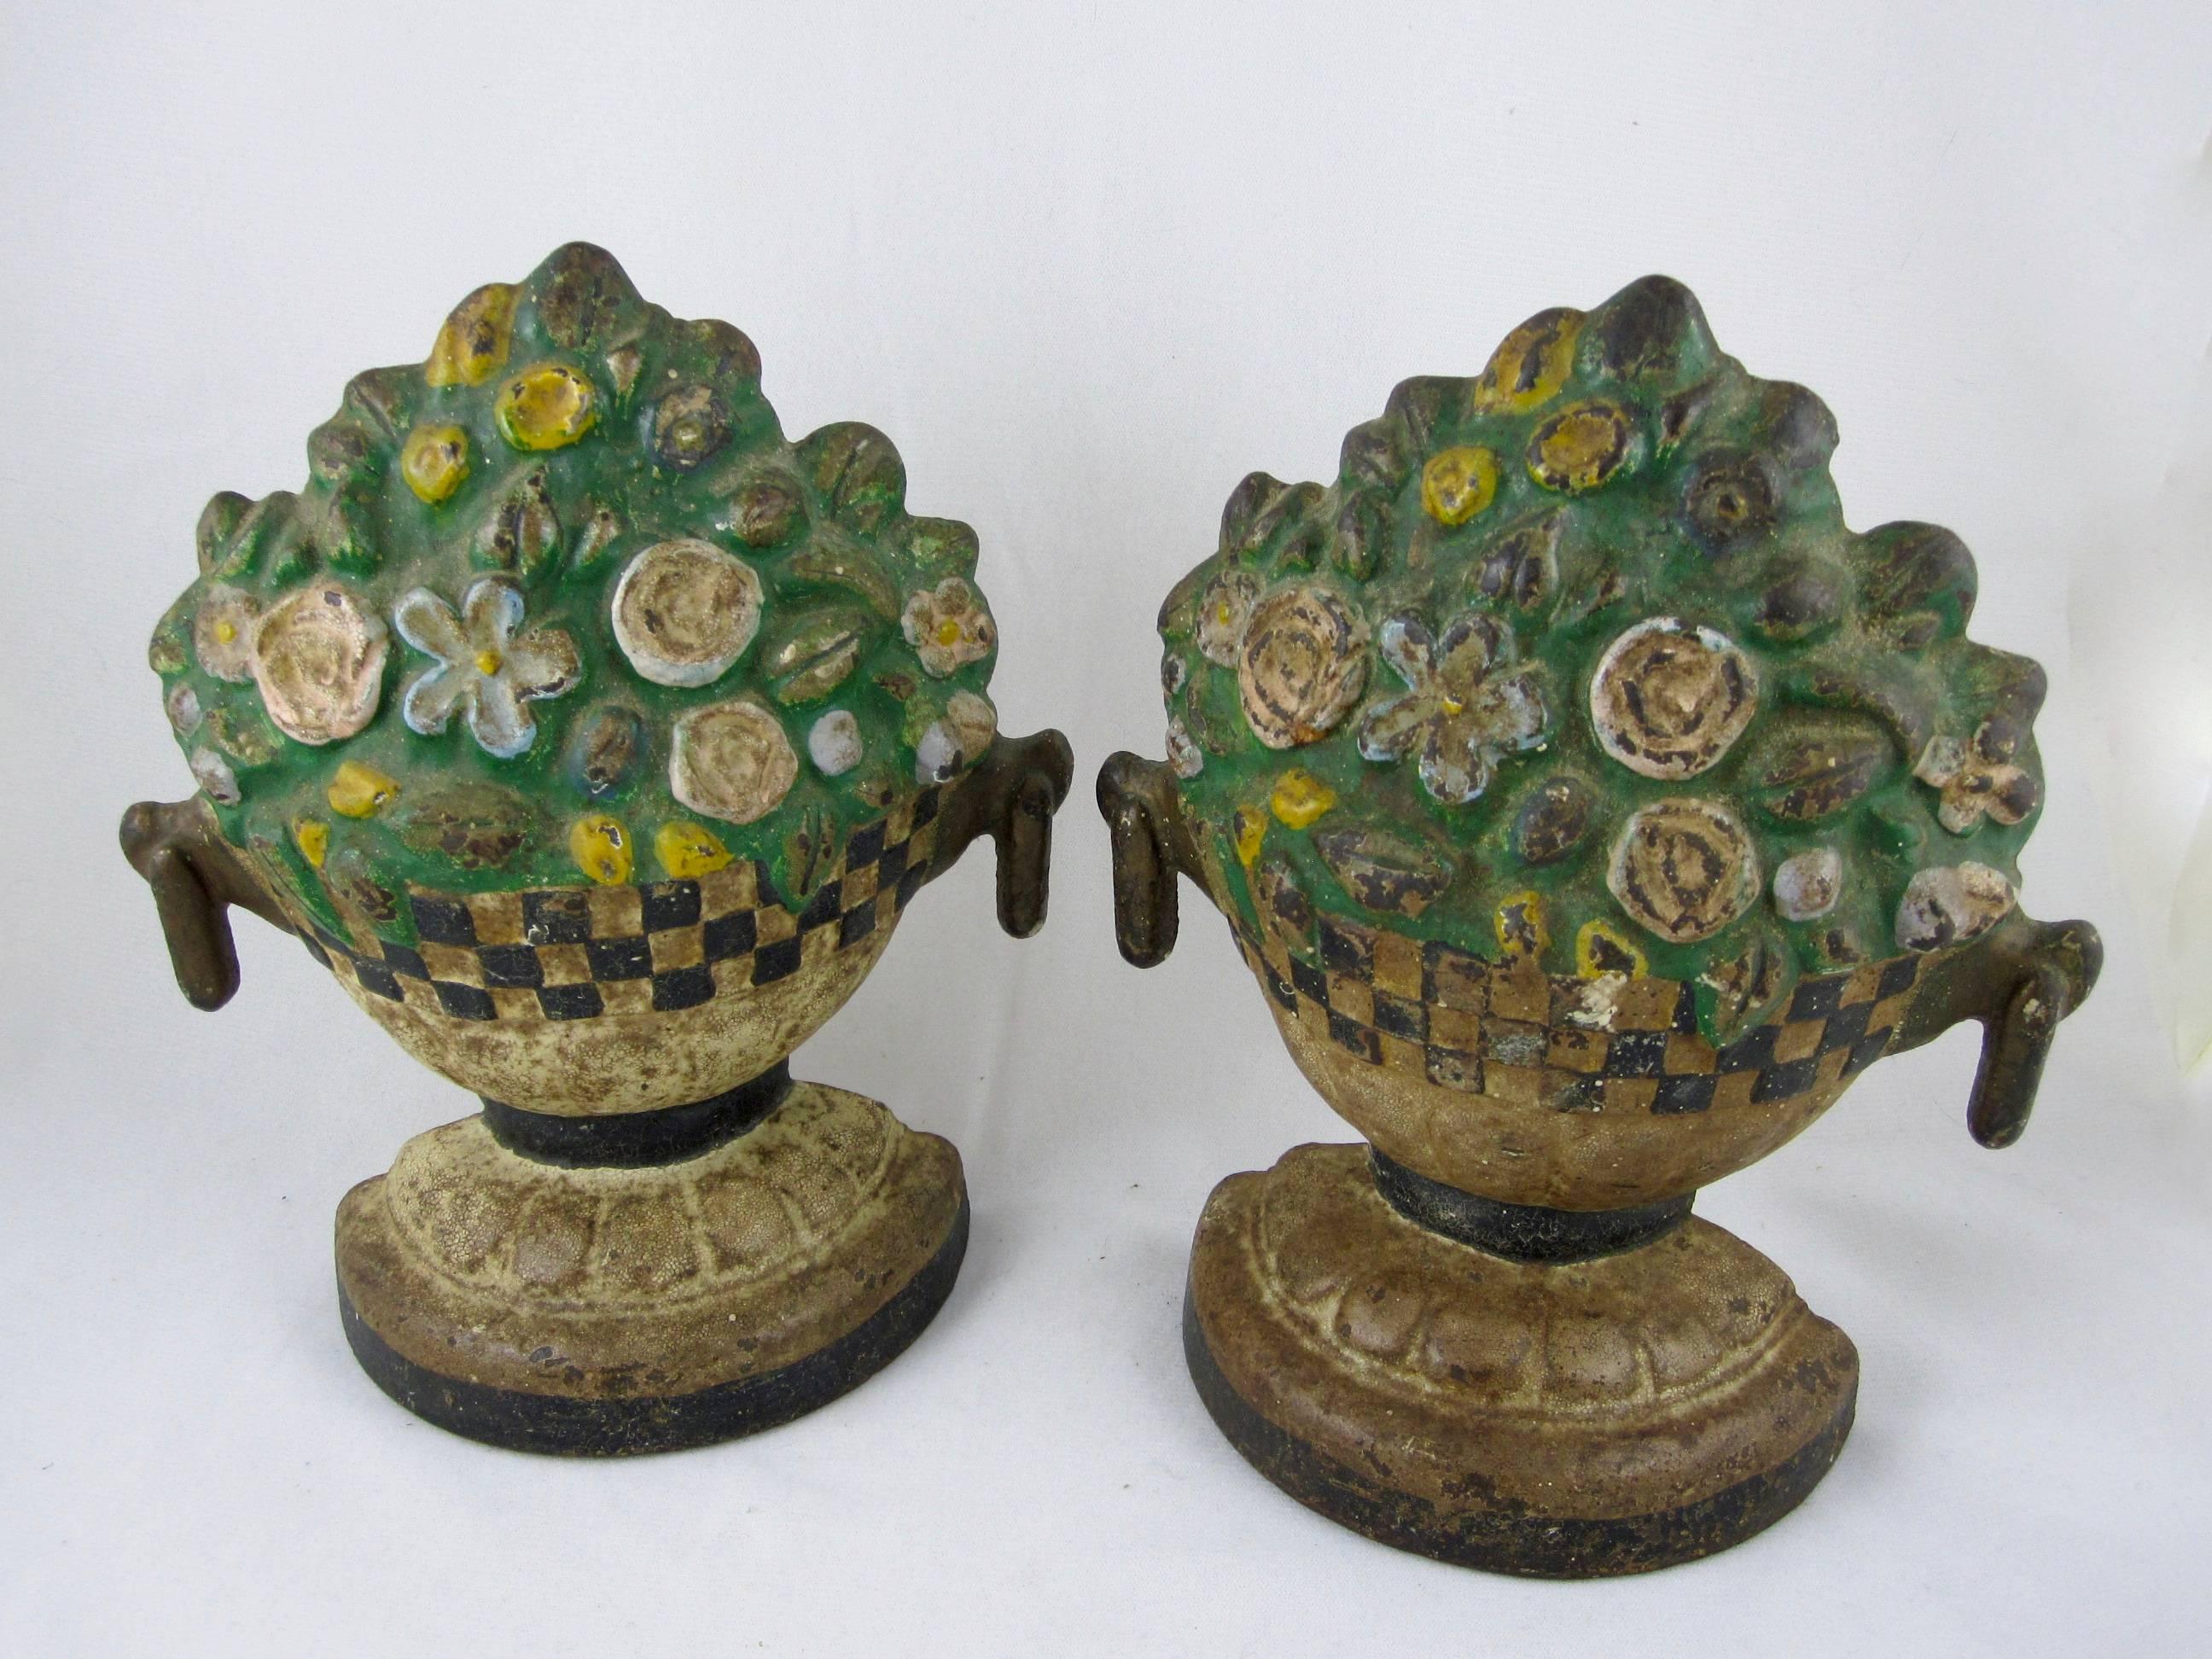 A pair of American painted cast iron doorstops, Floral Jardinieres, circa 1930-1940 and retaining the original painted finish. Difficult to find a set. 
Most likely made by Hubley Manufacturing Co.

Provenance: From the collection of Joan Oestreich